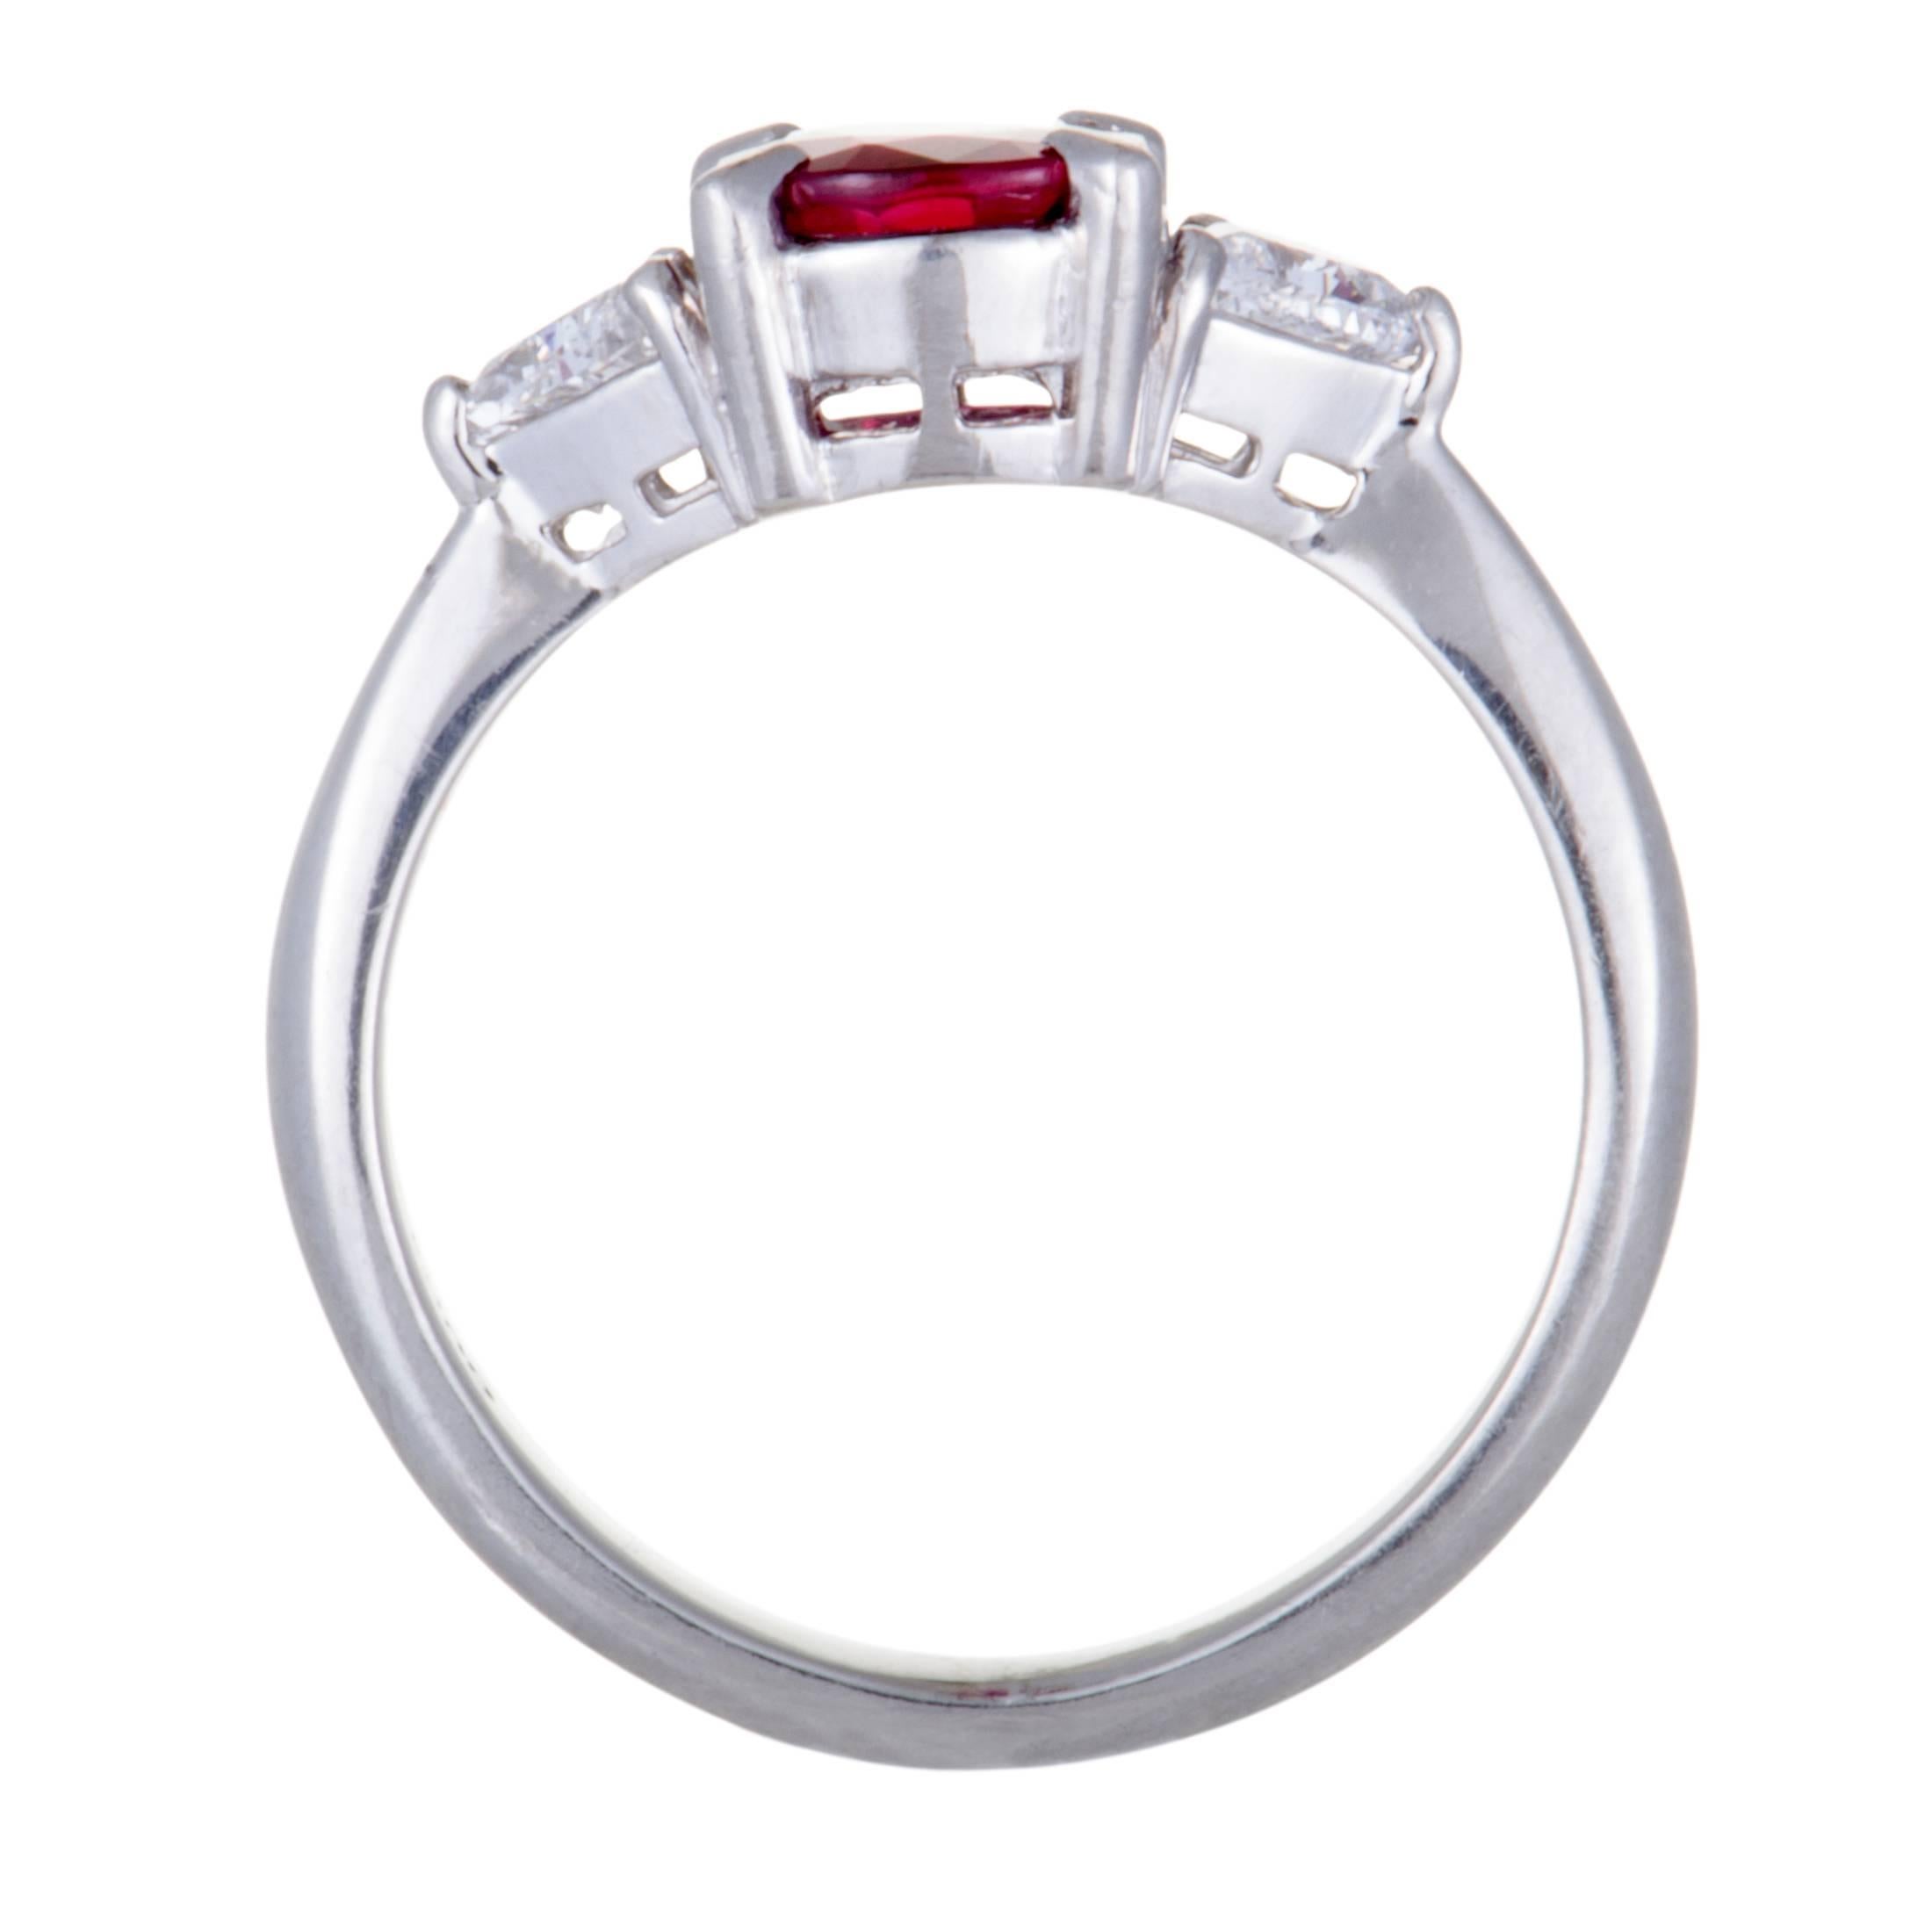 The captivatingly regal tone of ruby stands out magnificently against the bright gleam of platinum and sumptuous resplendence of diamonds in this delightfully classy ring. The ruby weighs 1.20 carats and the diamonds total 0.36 carats.
Ring Top